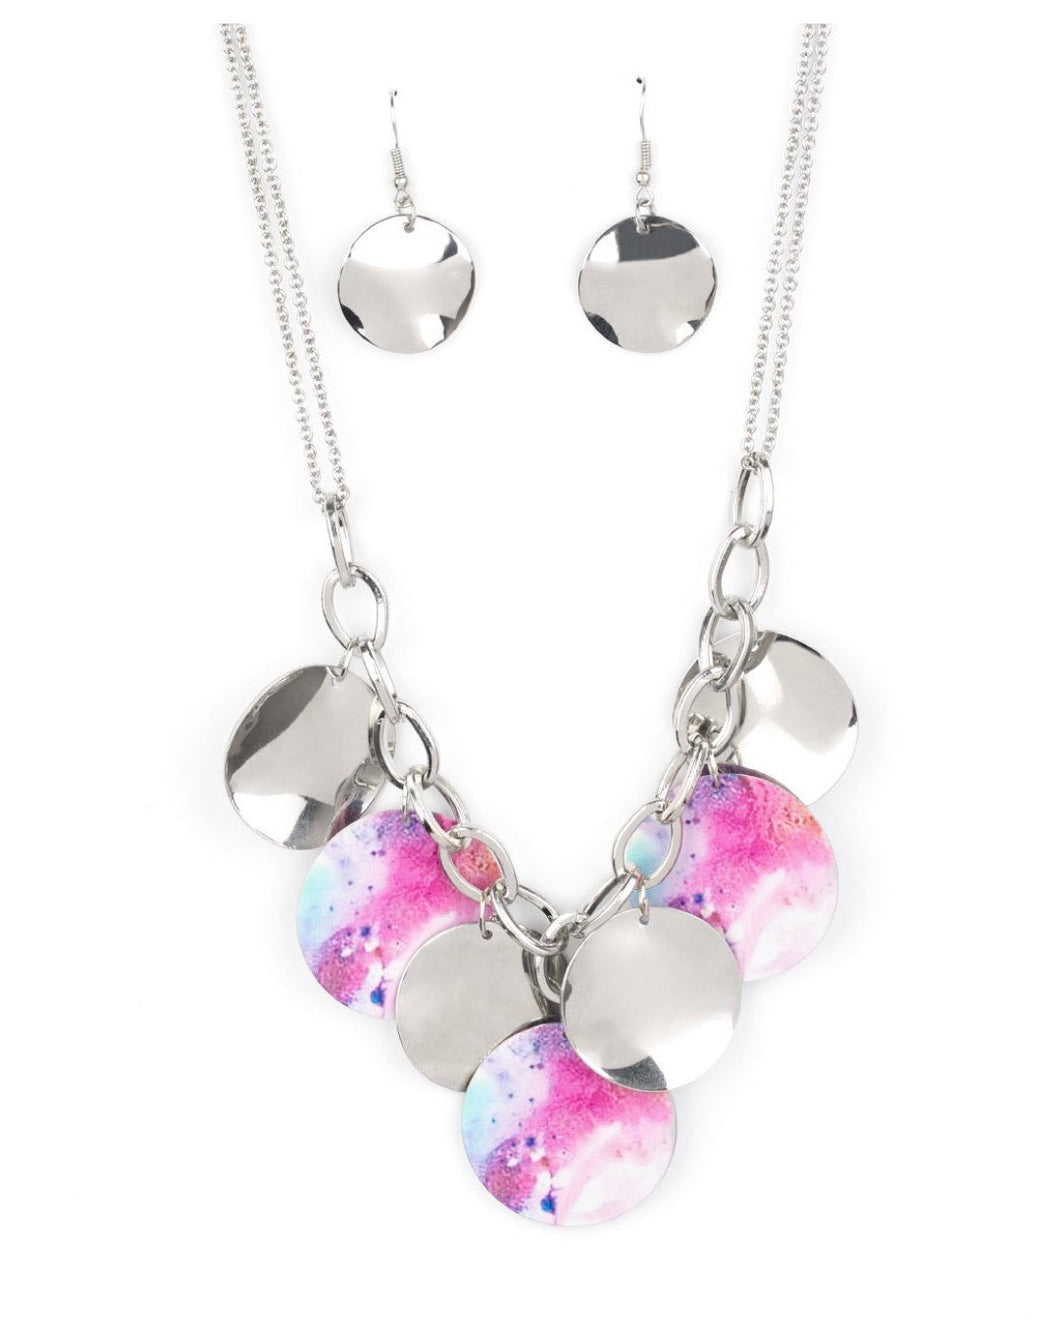 Tie Dye Drama - Multi - Necklace - Trend Blend / Fashion Fix Exclusive - October 2020 - TKT’s Jewelry & Accessories 